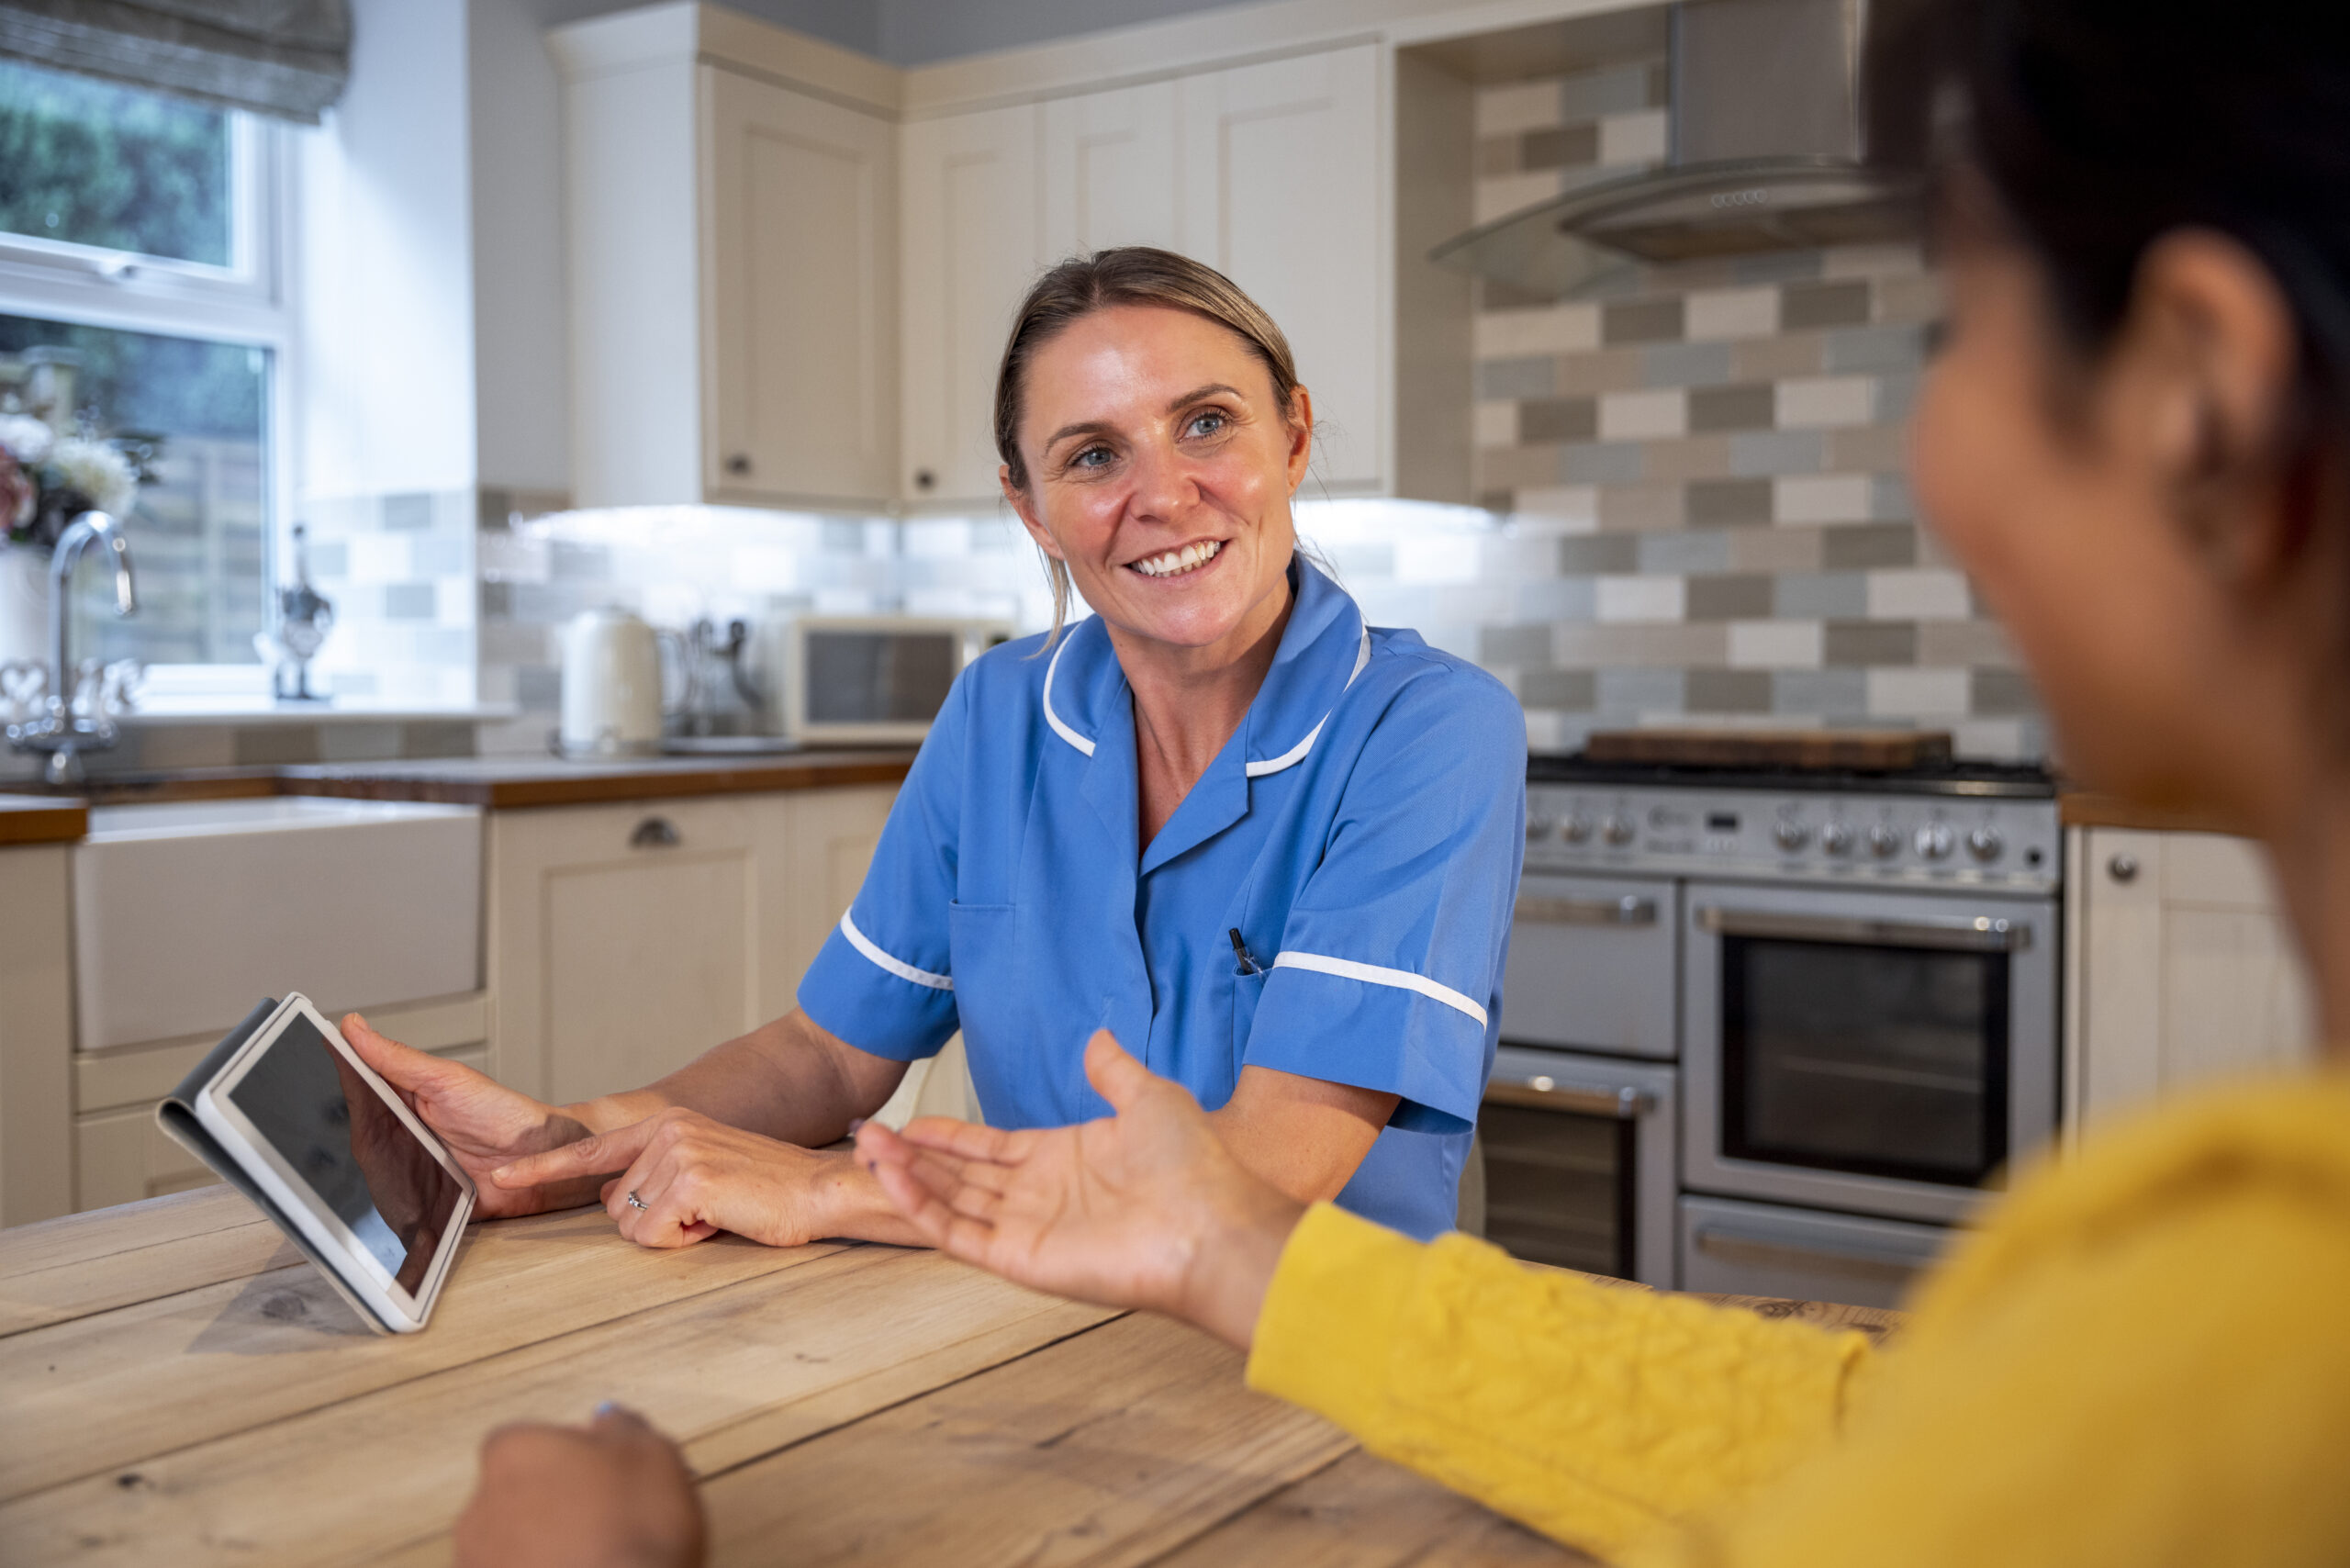 A woman talking to an on call nurse who has come to visit her at home, they are both sitting at the dining table in the kitchen. The nurse is talking to the patient and using a digital tablet as an aid.